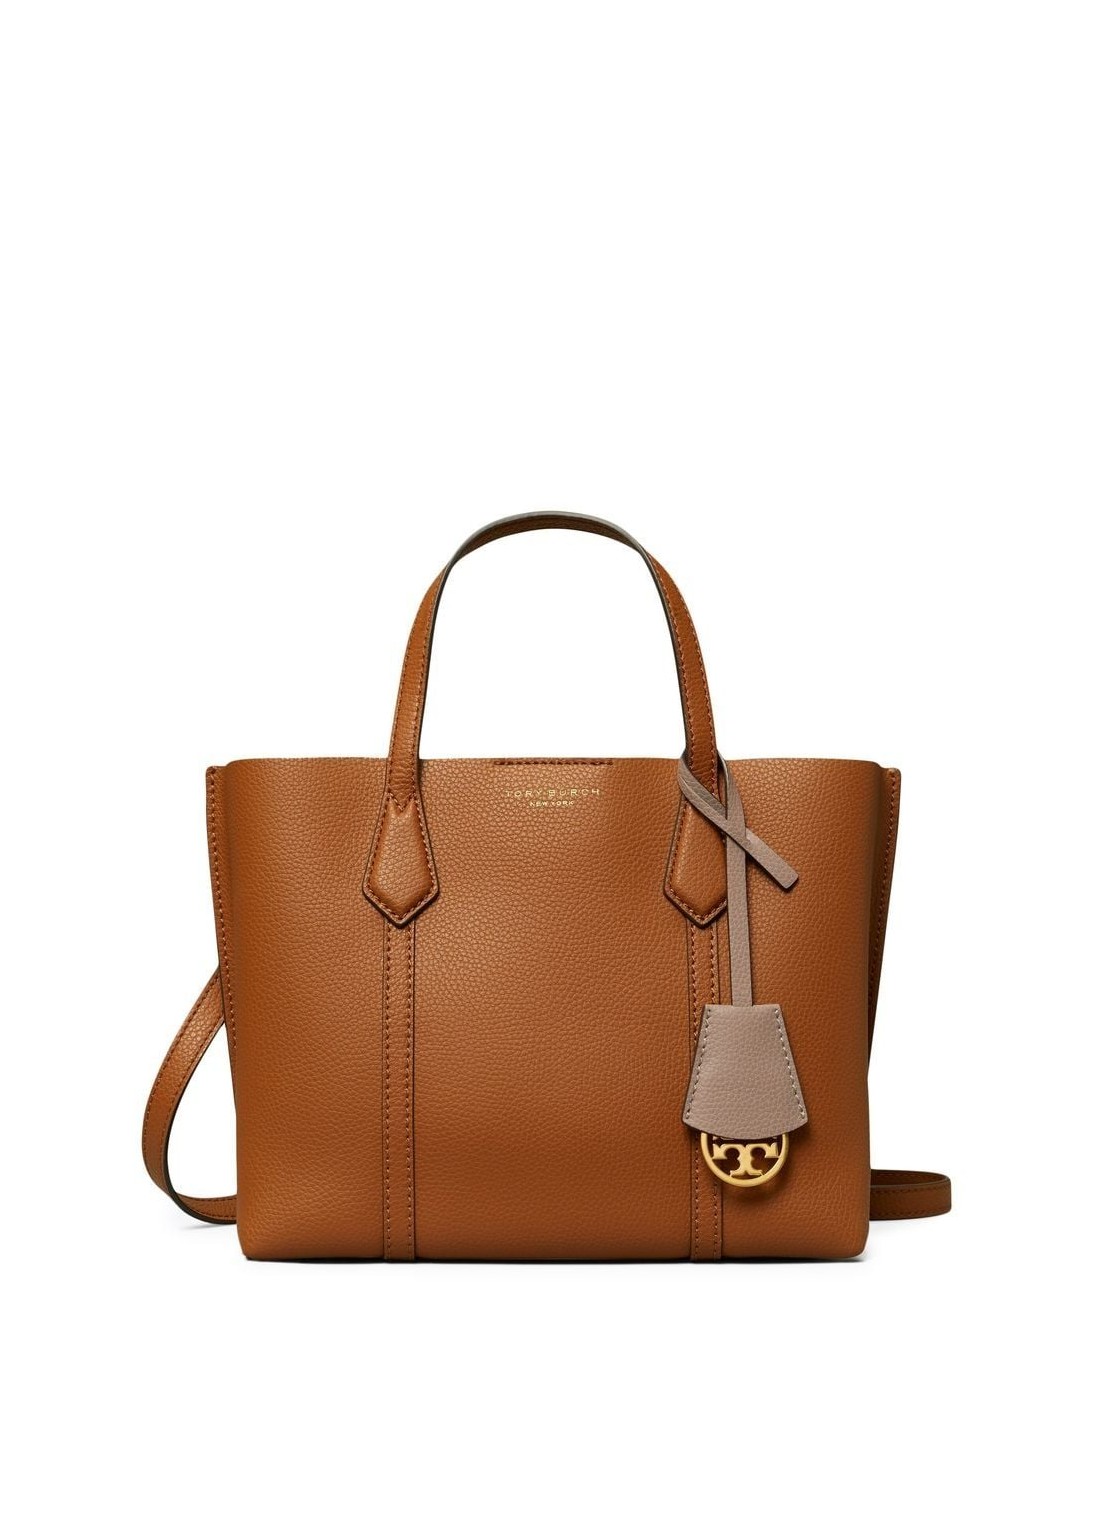 PERRY SMALL TRIPLE-COMPARTMENT TOTE